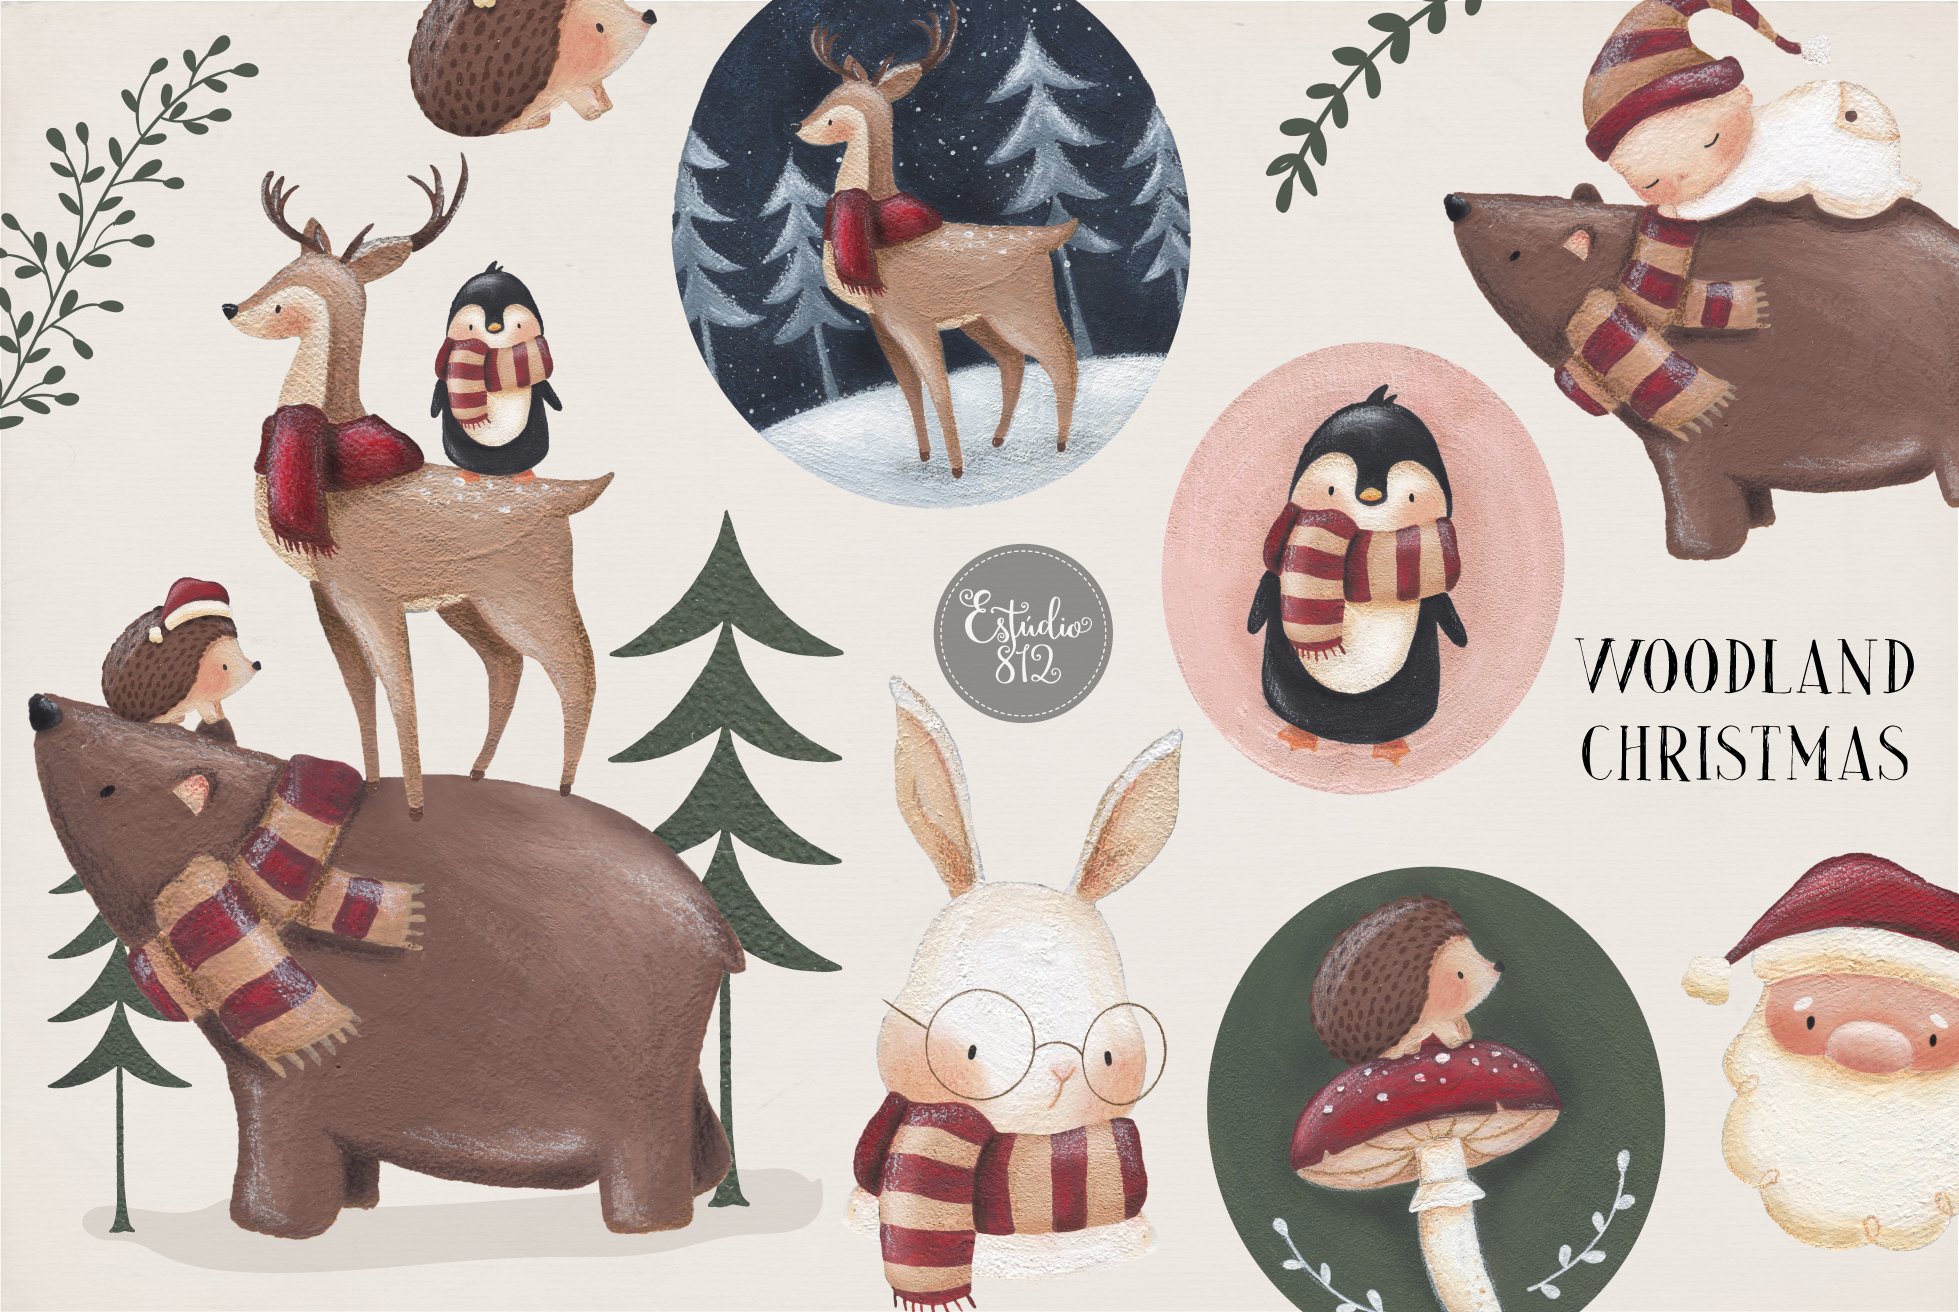 High quality pastel illustration with forest animals that are ready for Christmas celebrating.